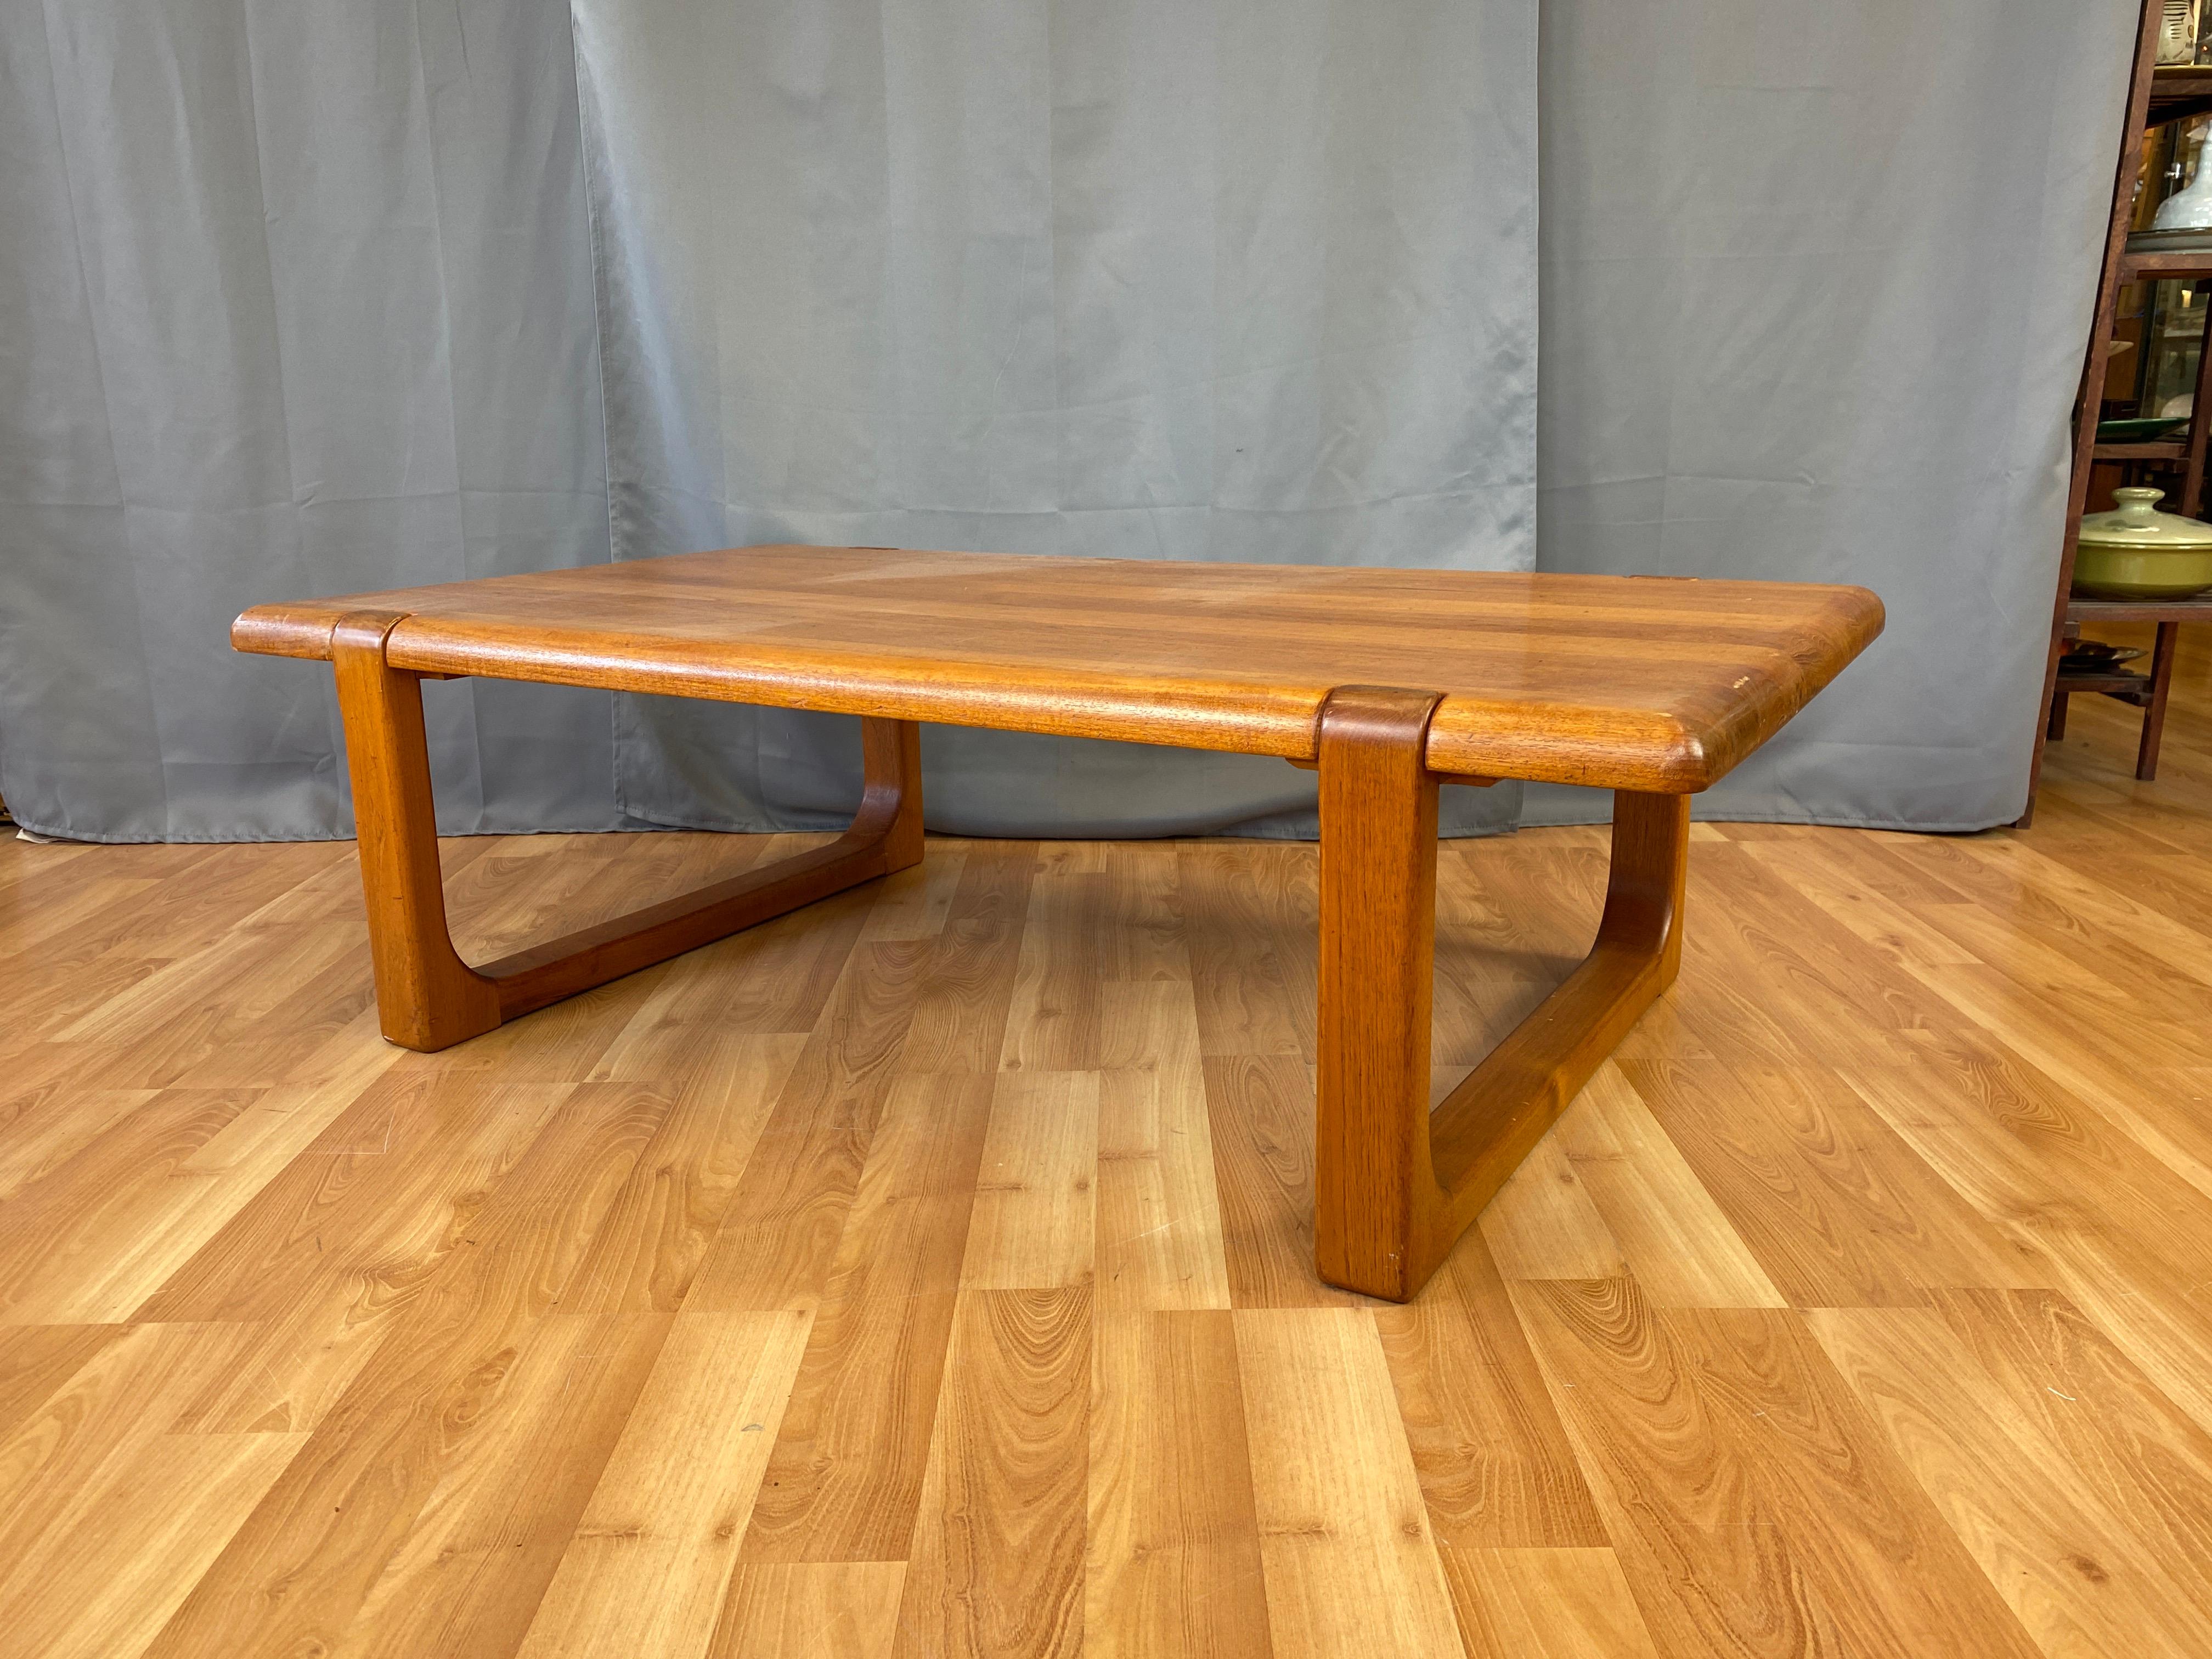 Offered here is a substantial 1970s Danish solid teak coffee or cocktail table by Niels Bach. Strong 